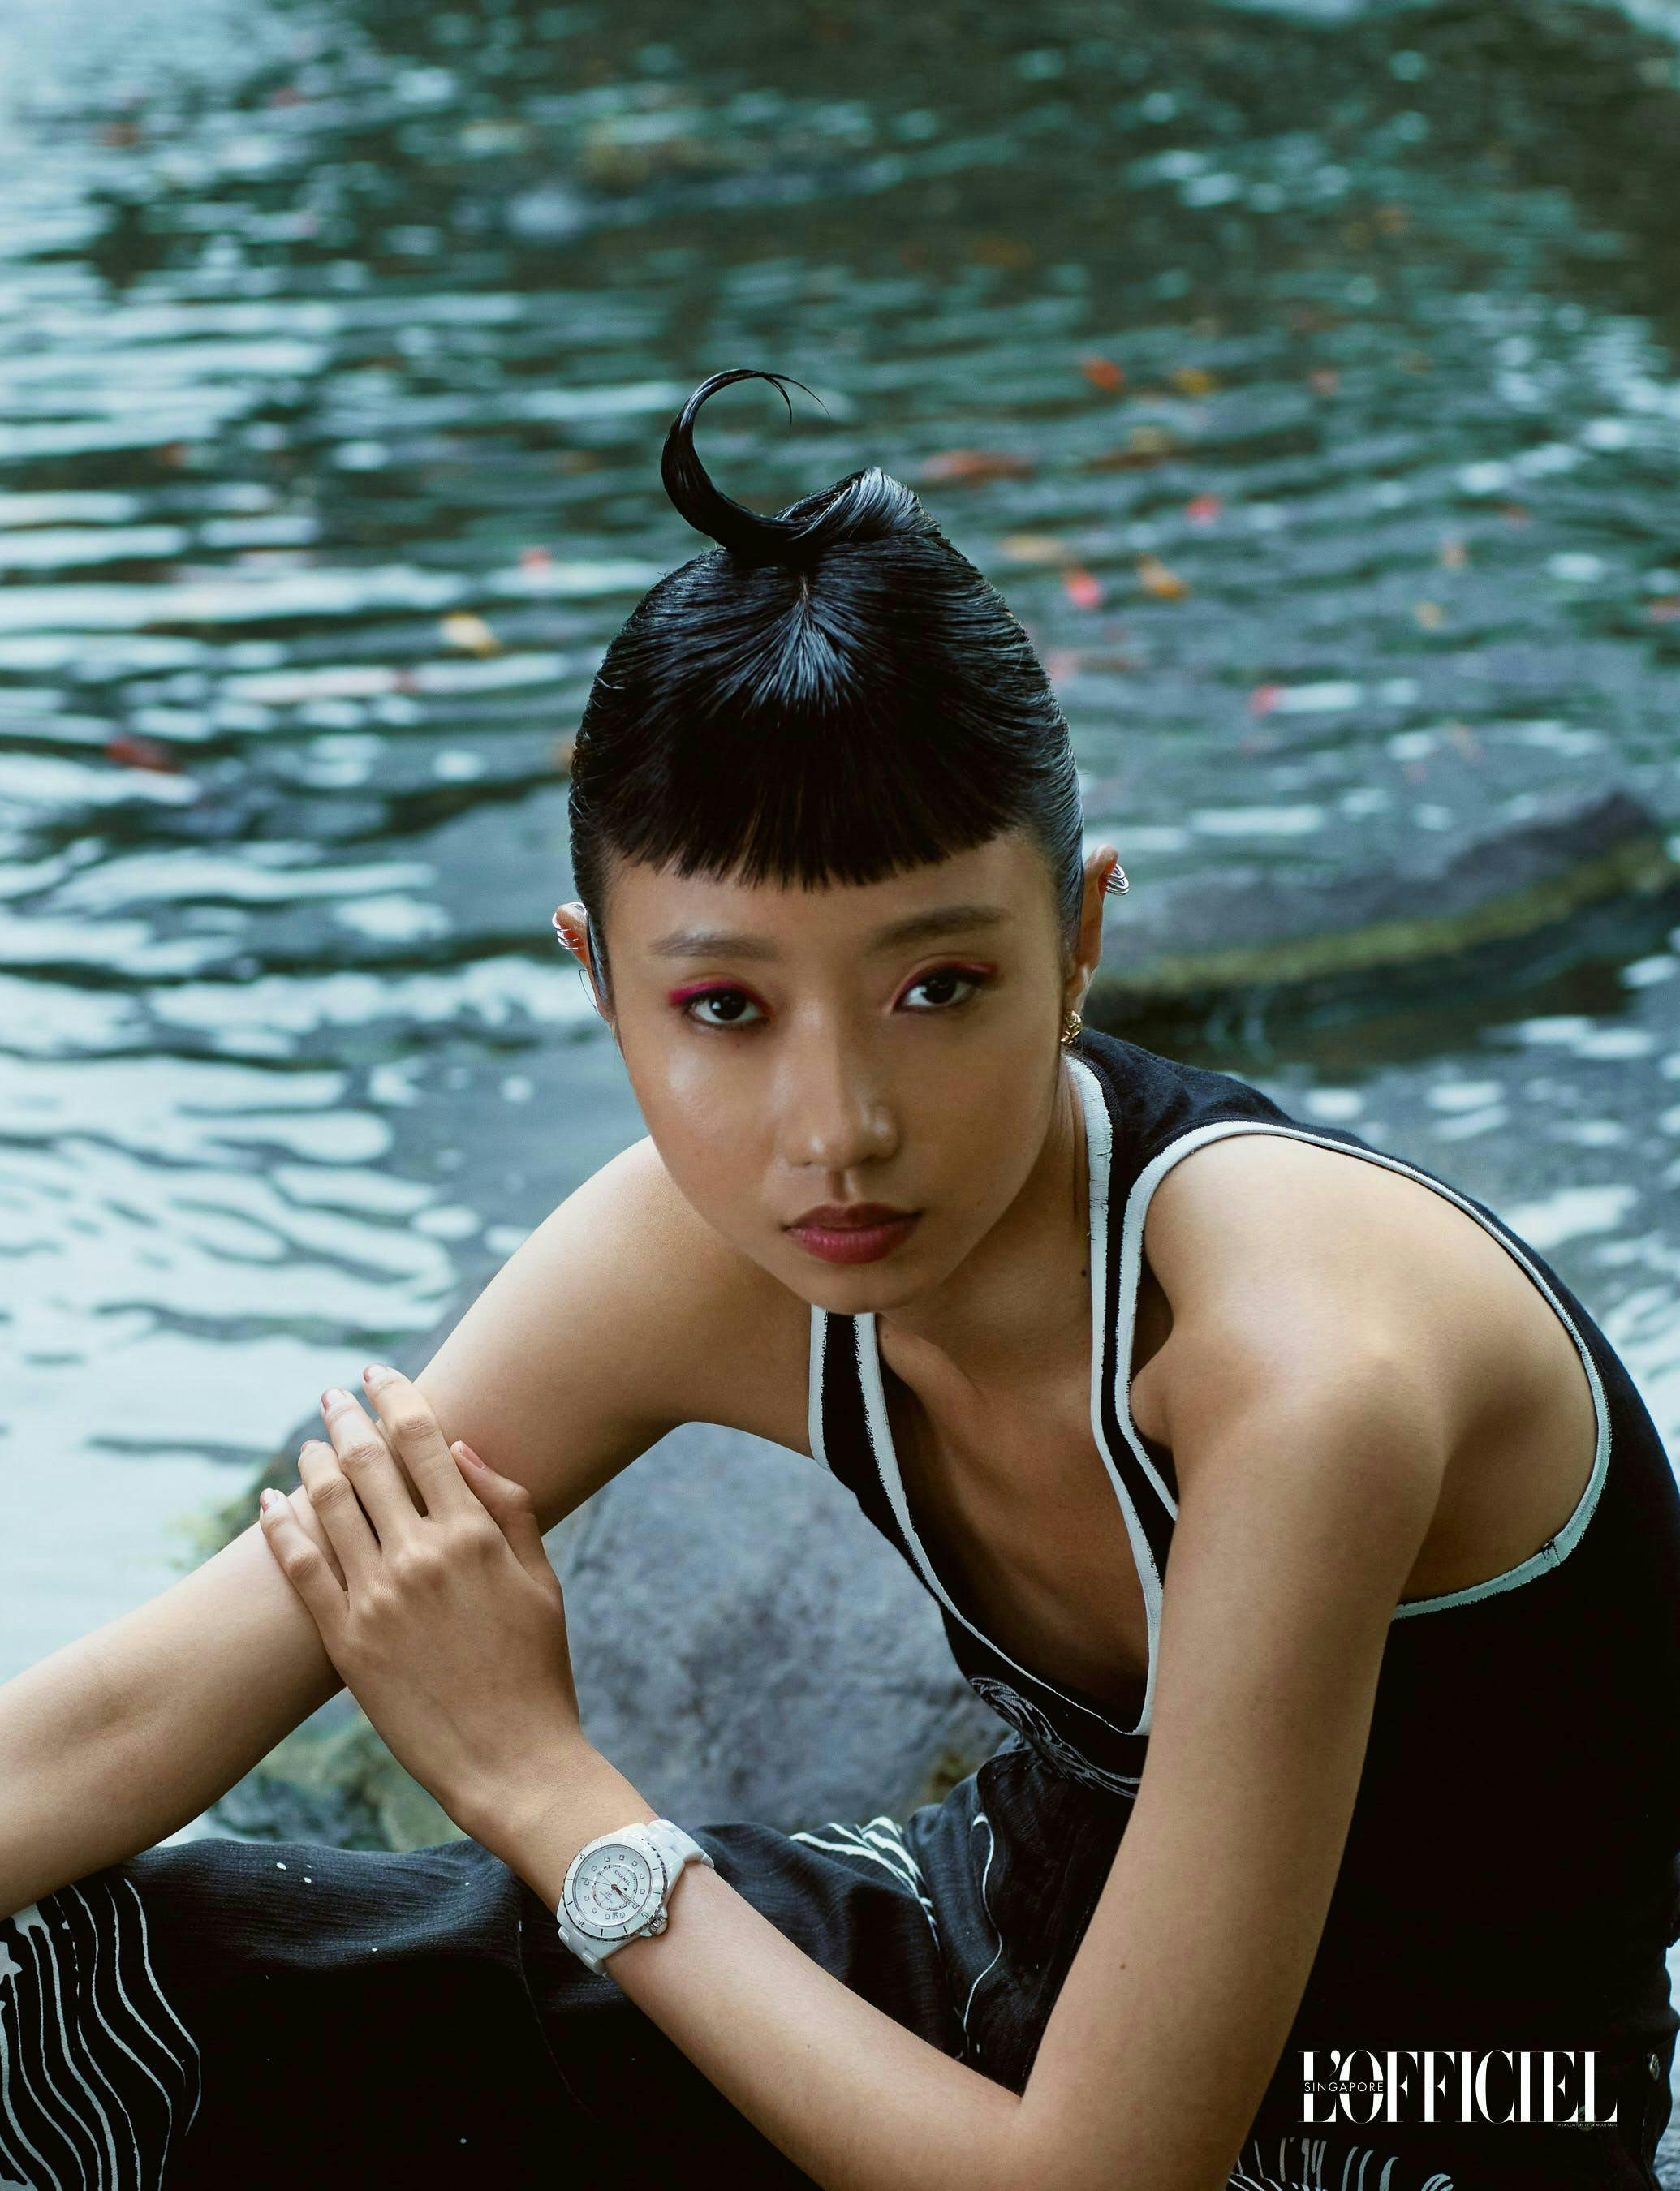 From L'Officiel Singapore Dec/Jan 2021 Issue • PHOTOGRAPHY Zantz Han • STYLING Gregory Woo • HAIR Junz Loke using Goldwell • MAKEUP Sha Shamsi using Chanel Beauty • PHOTOGRAPHY ASSISTANTS Joel Fong, Dennis Er, and Pearlcelia Liong • STYLING ASSISTANT Adelynn Wong • MAKEUP ASSISTANT Noor Faseha • MODEL Kaigin / Now Model Management